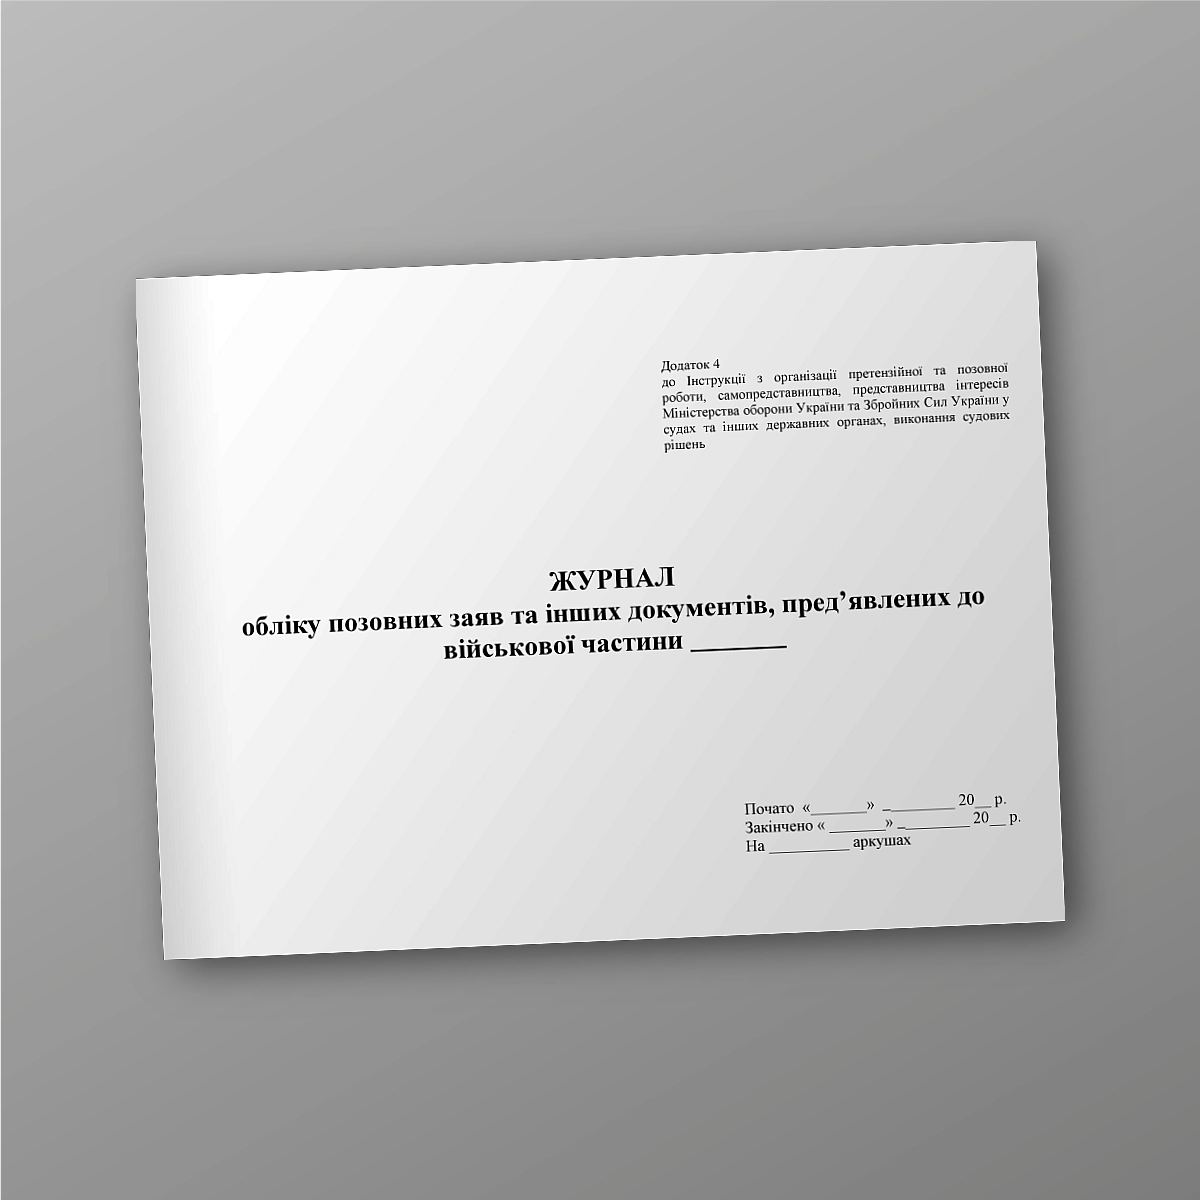 Journal of accounting of claims and other documents presented to military base | PrintTo: